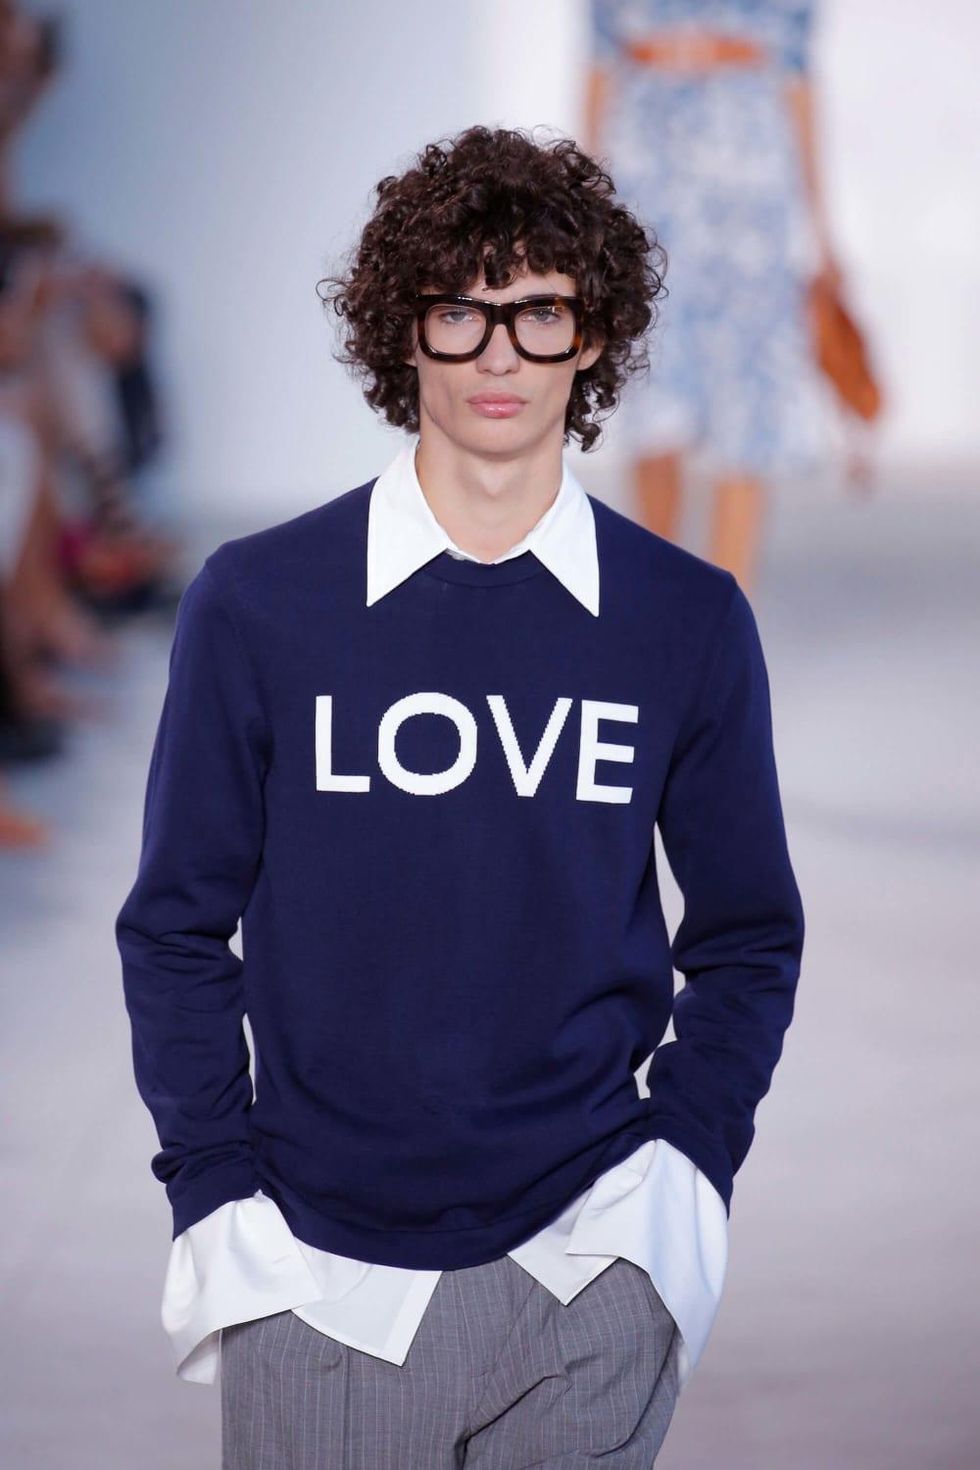 Michael Kors spring 2017 collection LOVE sweater